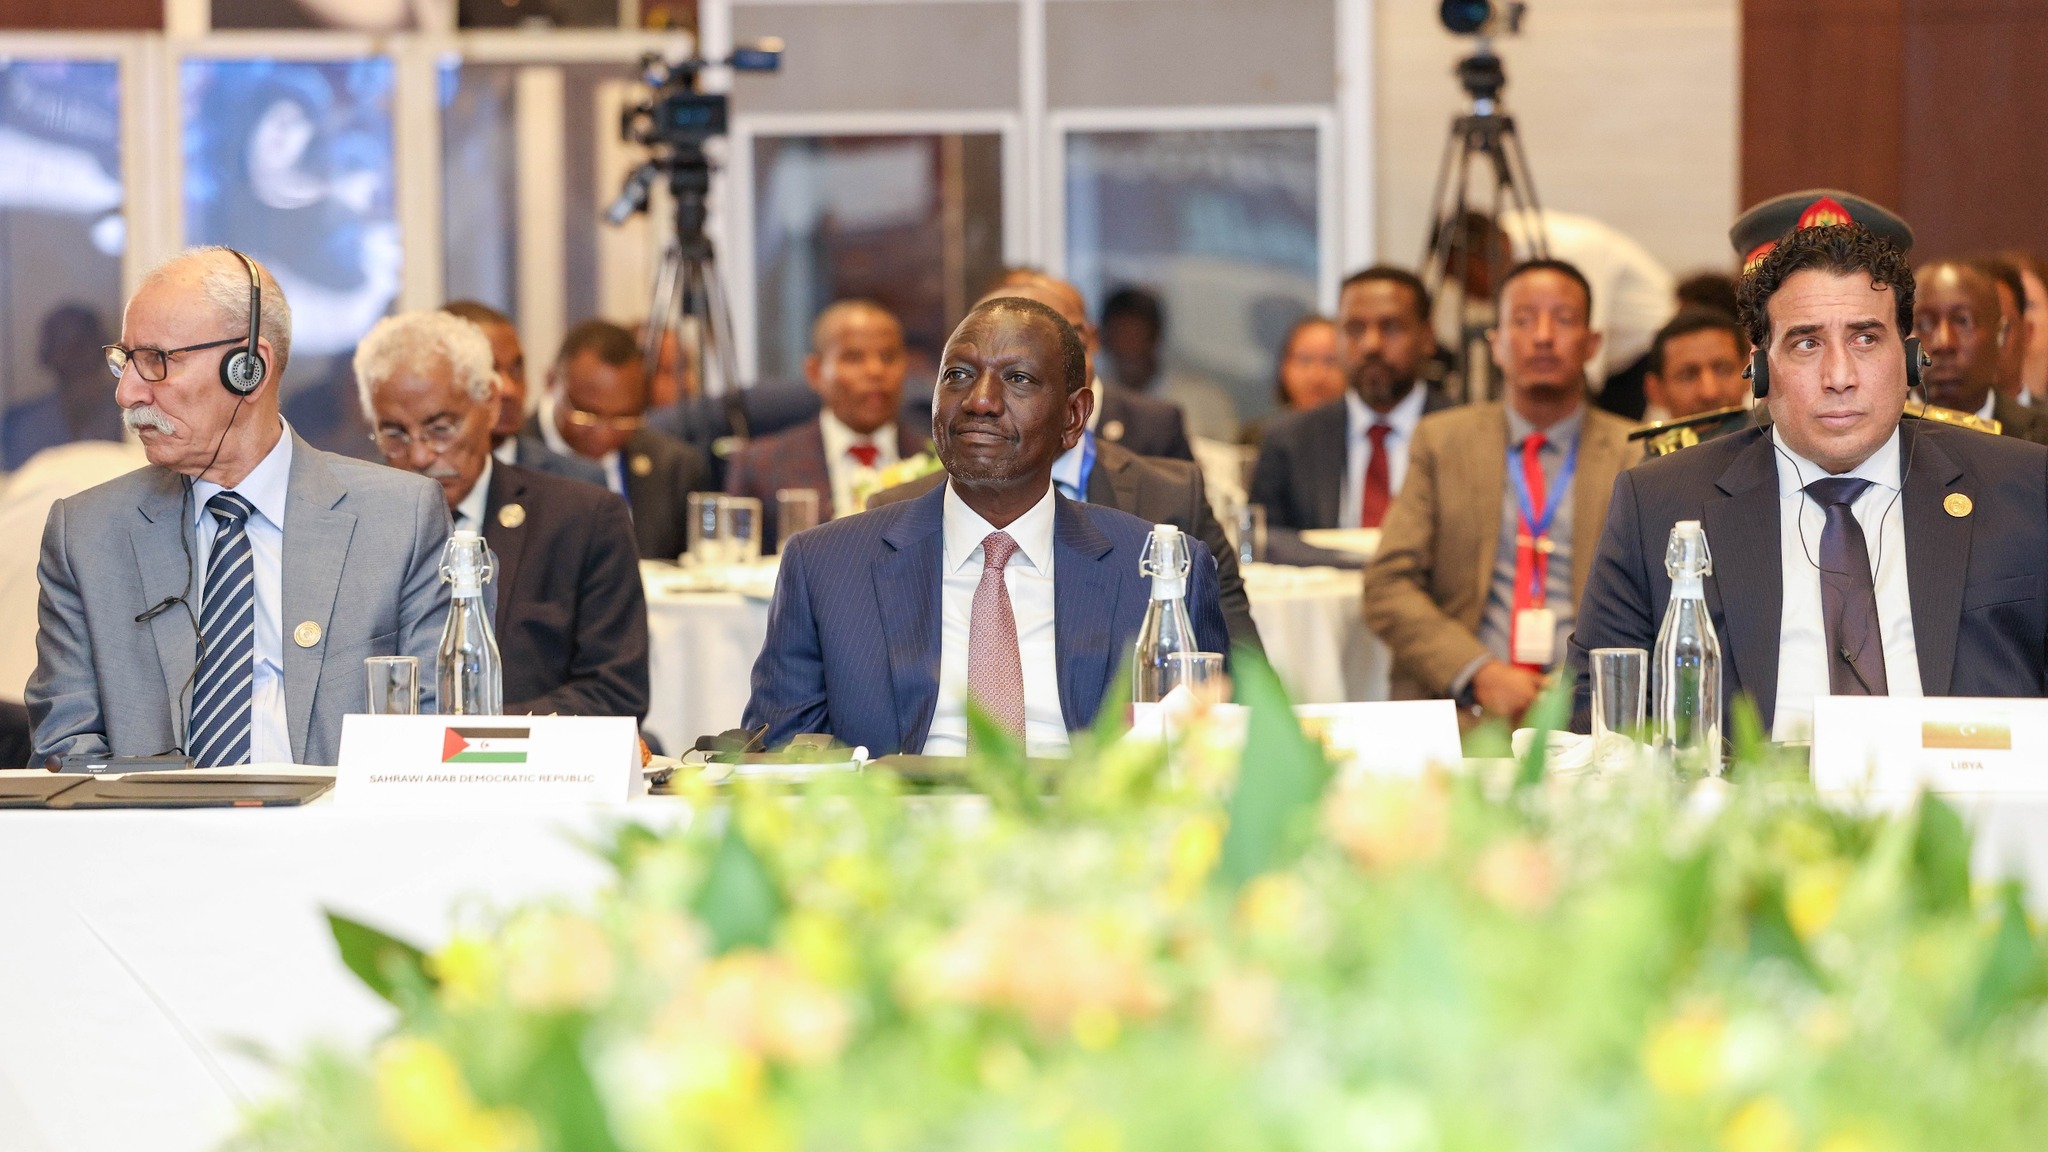 60 Percent of Vaccines Used in Africa to be Produced Locally, President Ruto